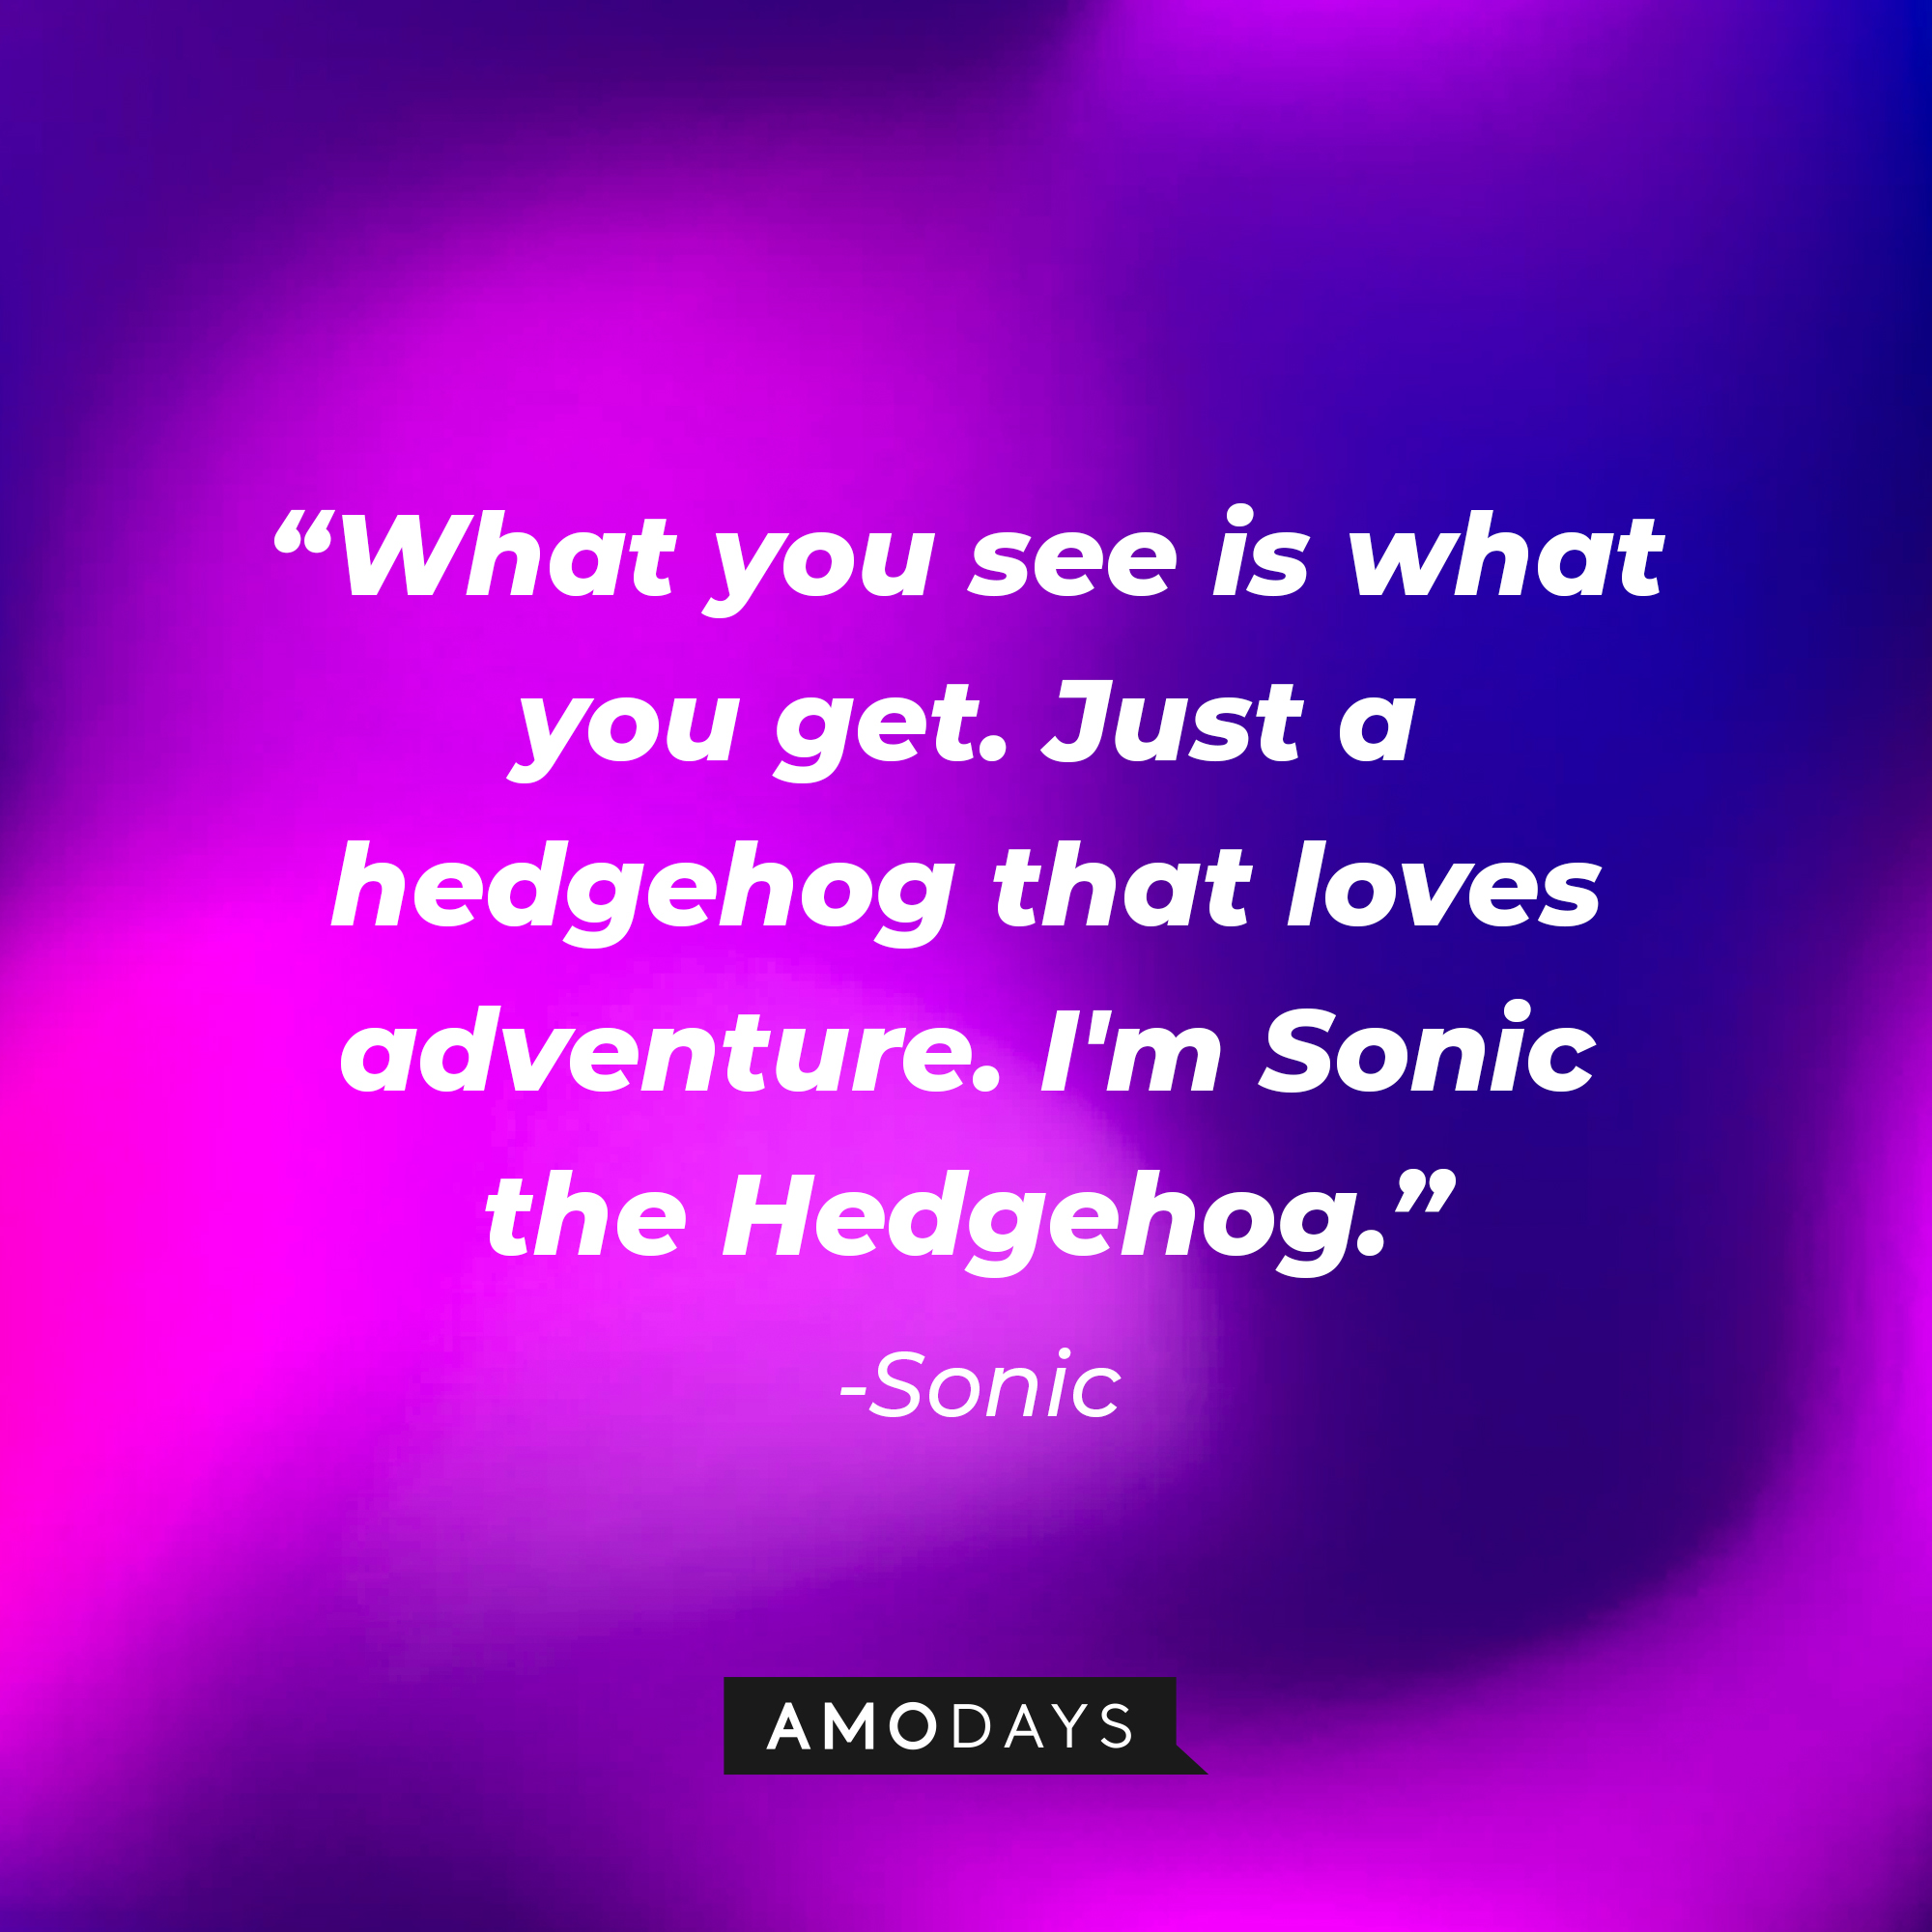 Sonic's quote: "What you see is what you get. Just a hedgehog that loves adventure. I'm Sonic the Hedgehog." | Source: Amodays